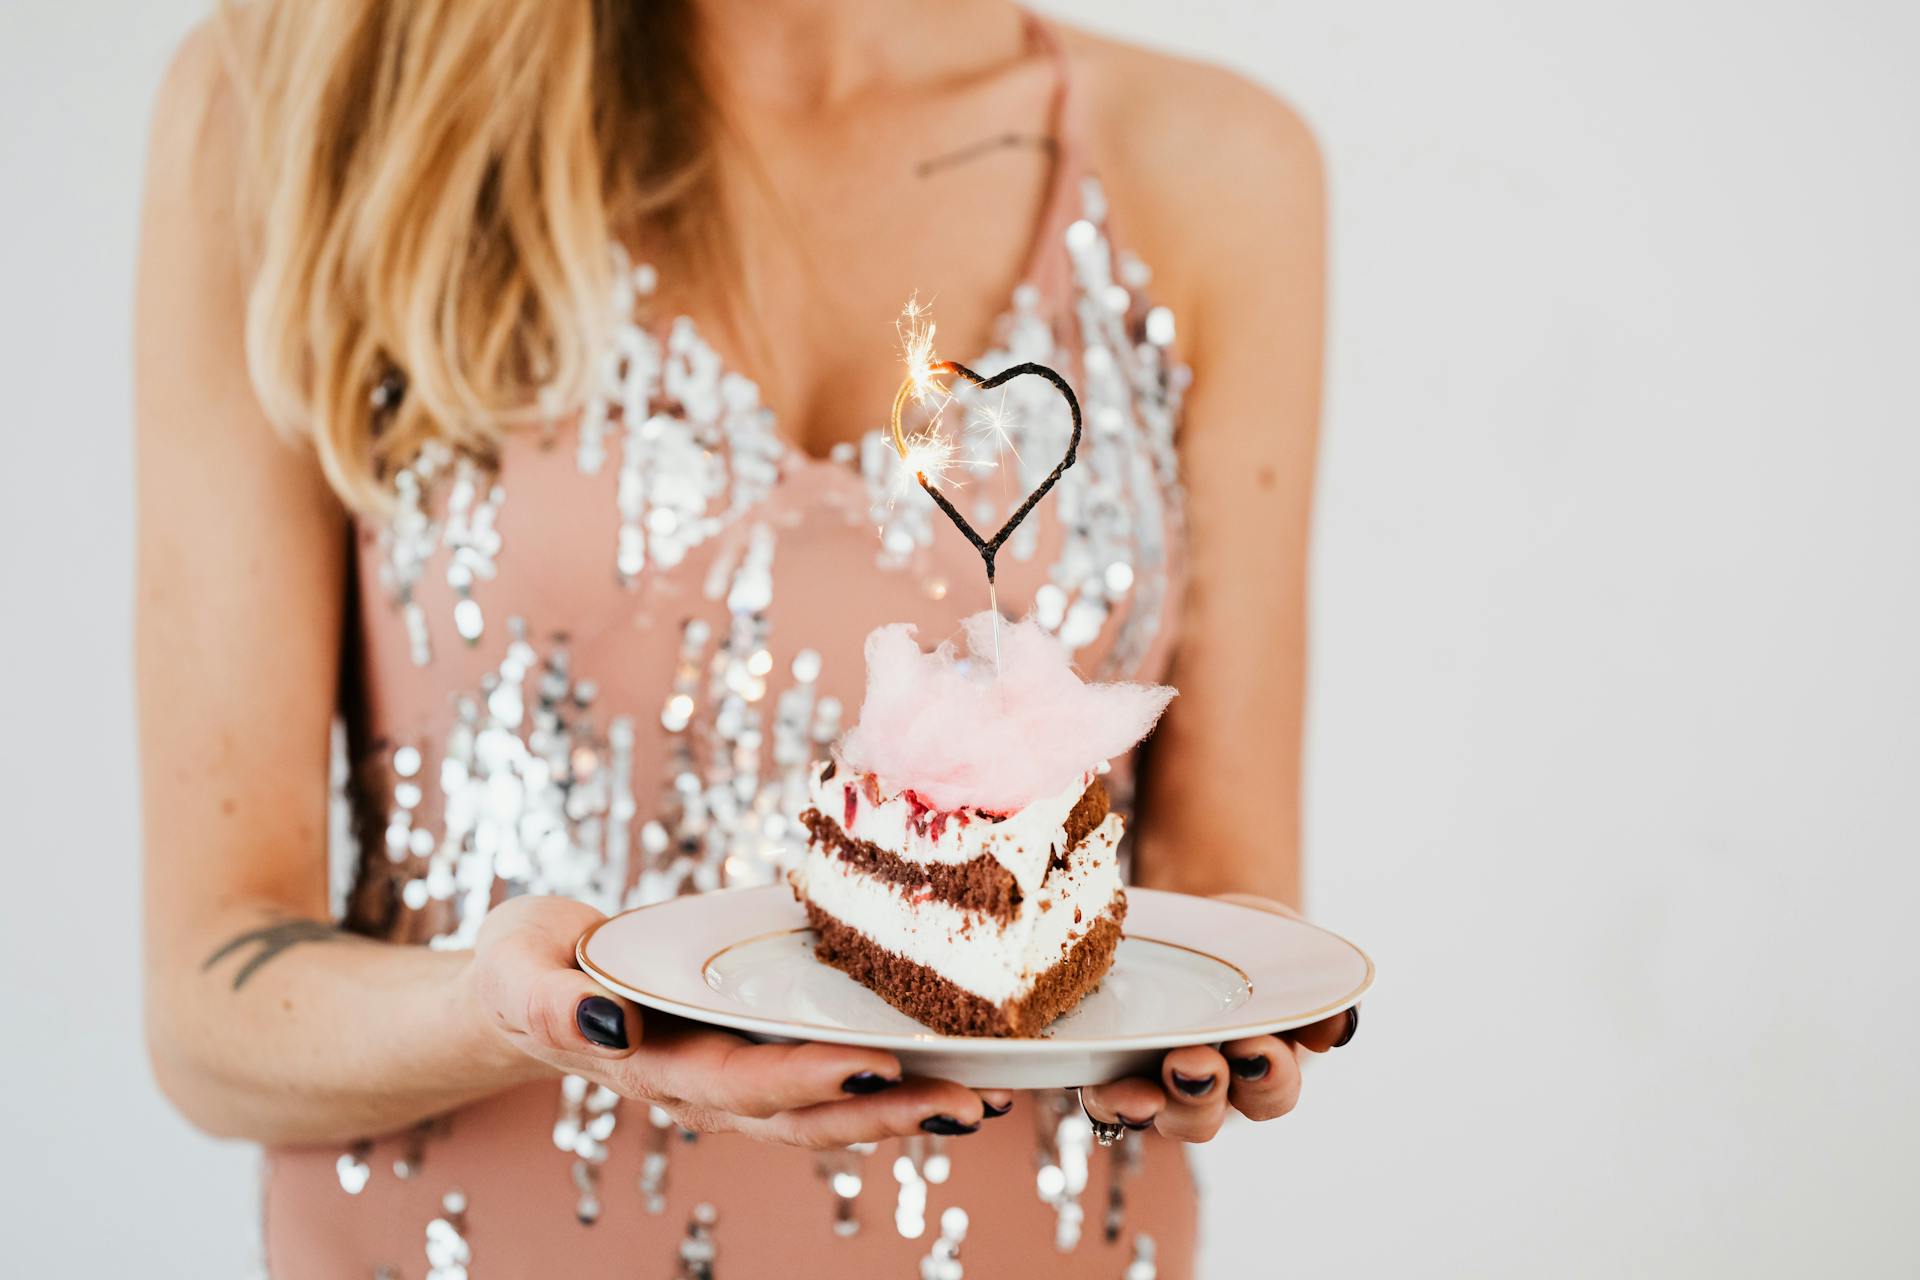 A woman holding a cake | Source: Pexels